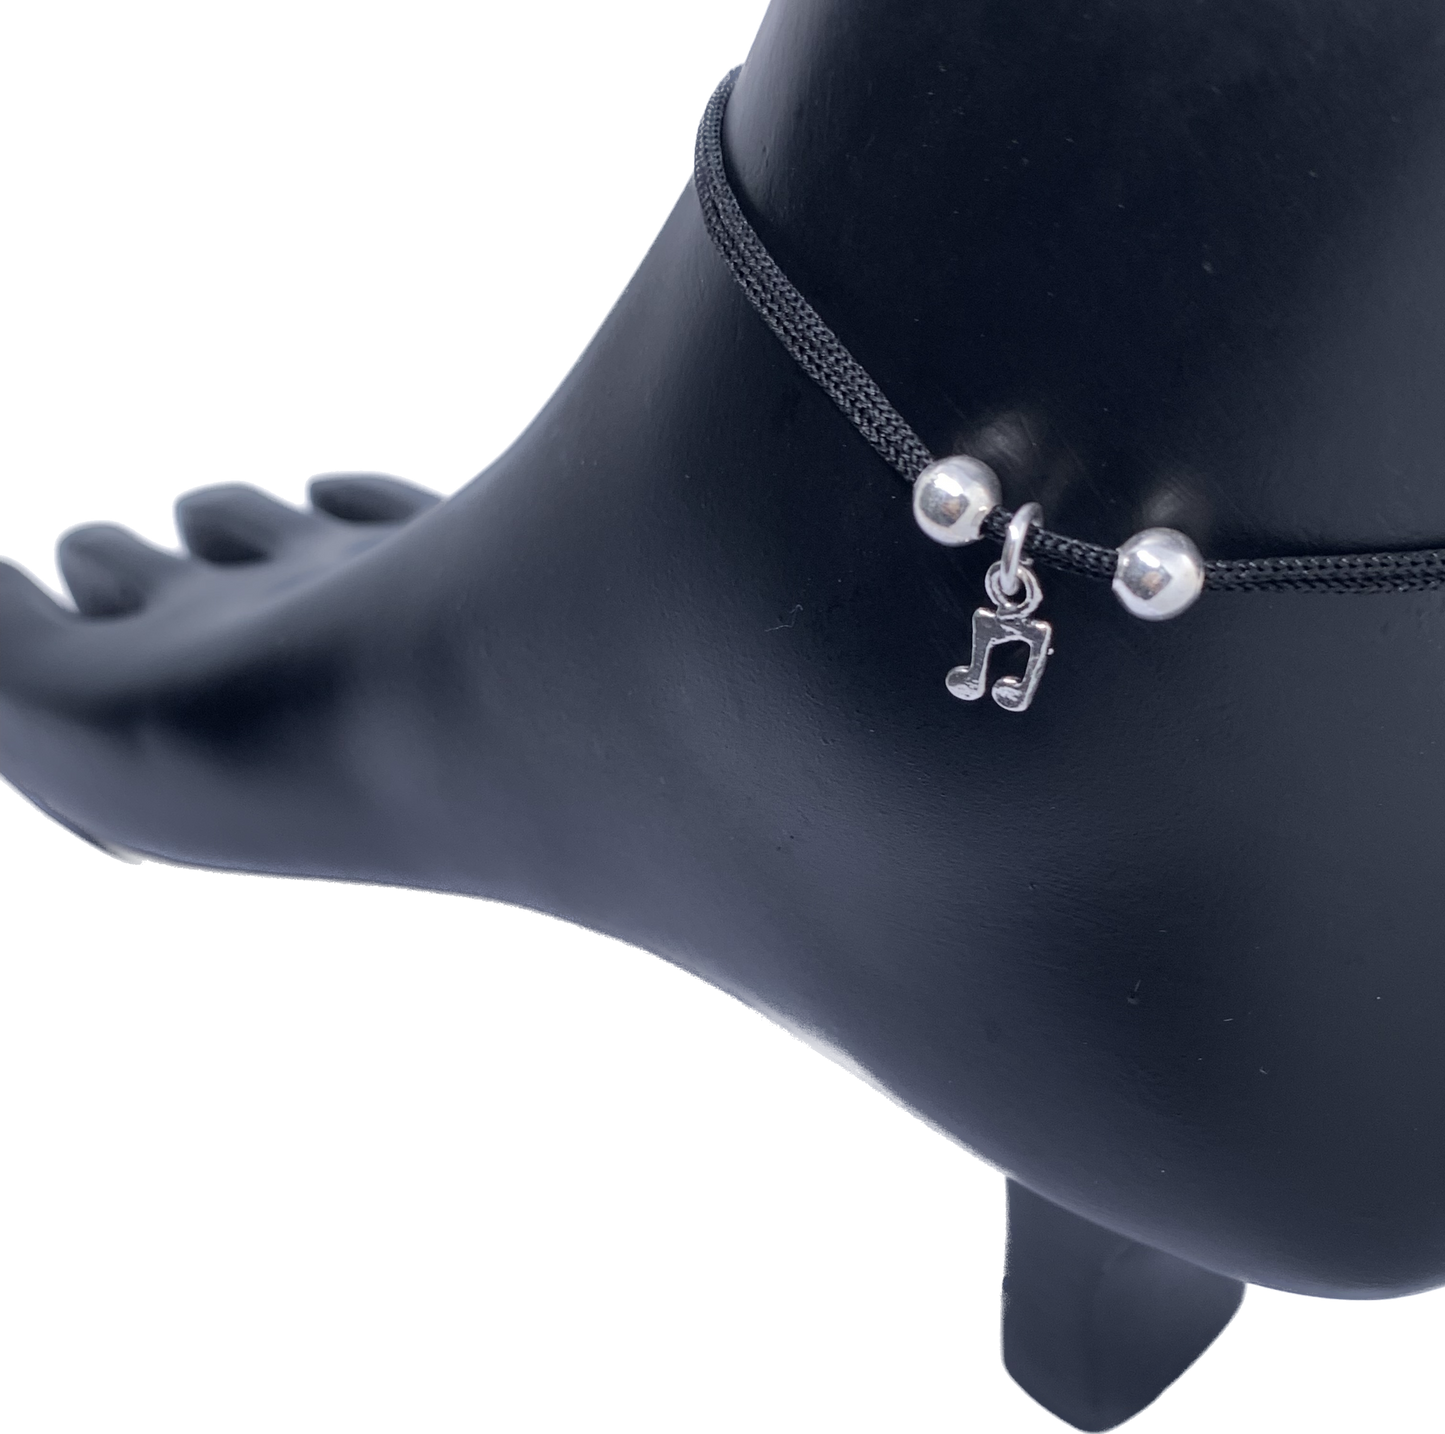 Black Thread Music Silver Anklet Adjustable - Silver Jewelery 925